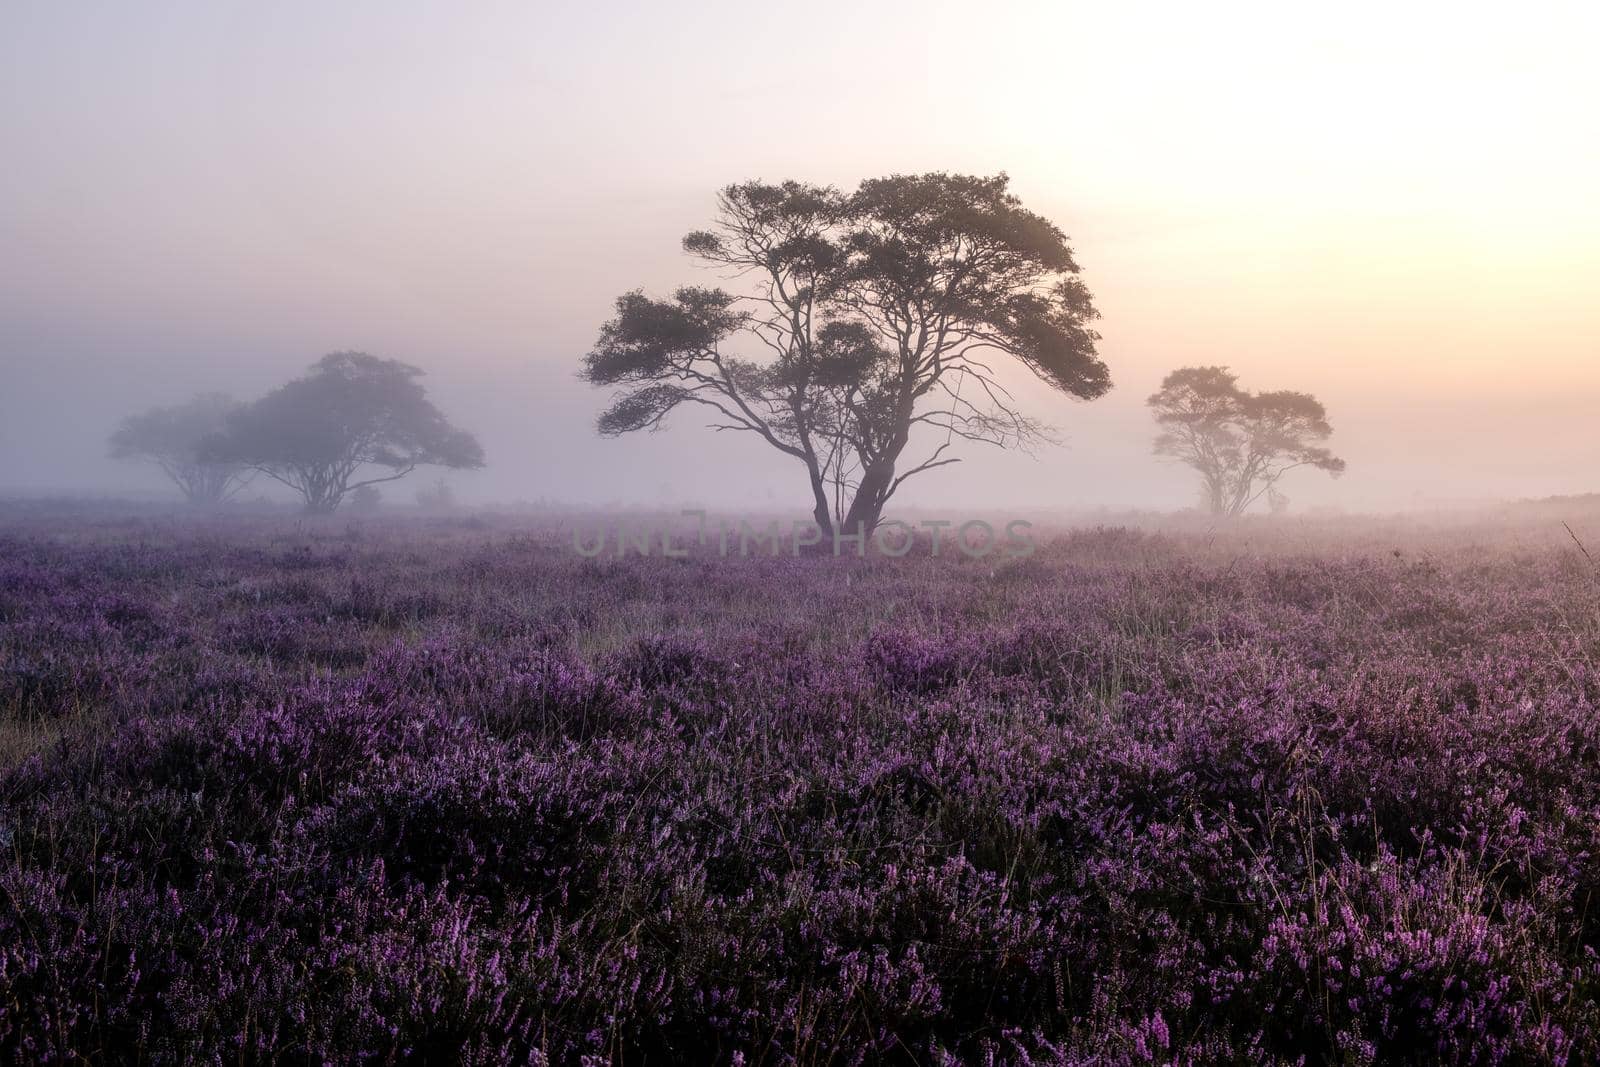 Blooming heather in the Netherlands,Sunny foggy Sunrise over the pink purple hills at Westerheid park Netherlands, blooming Heather fields in the Netherlands during Sunrise  by fokkebok